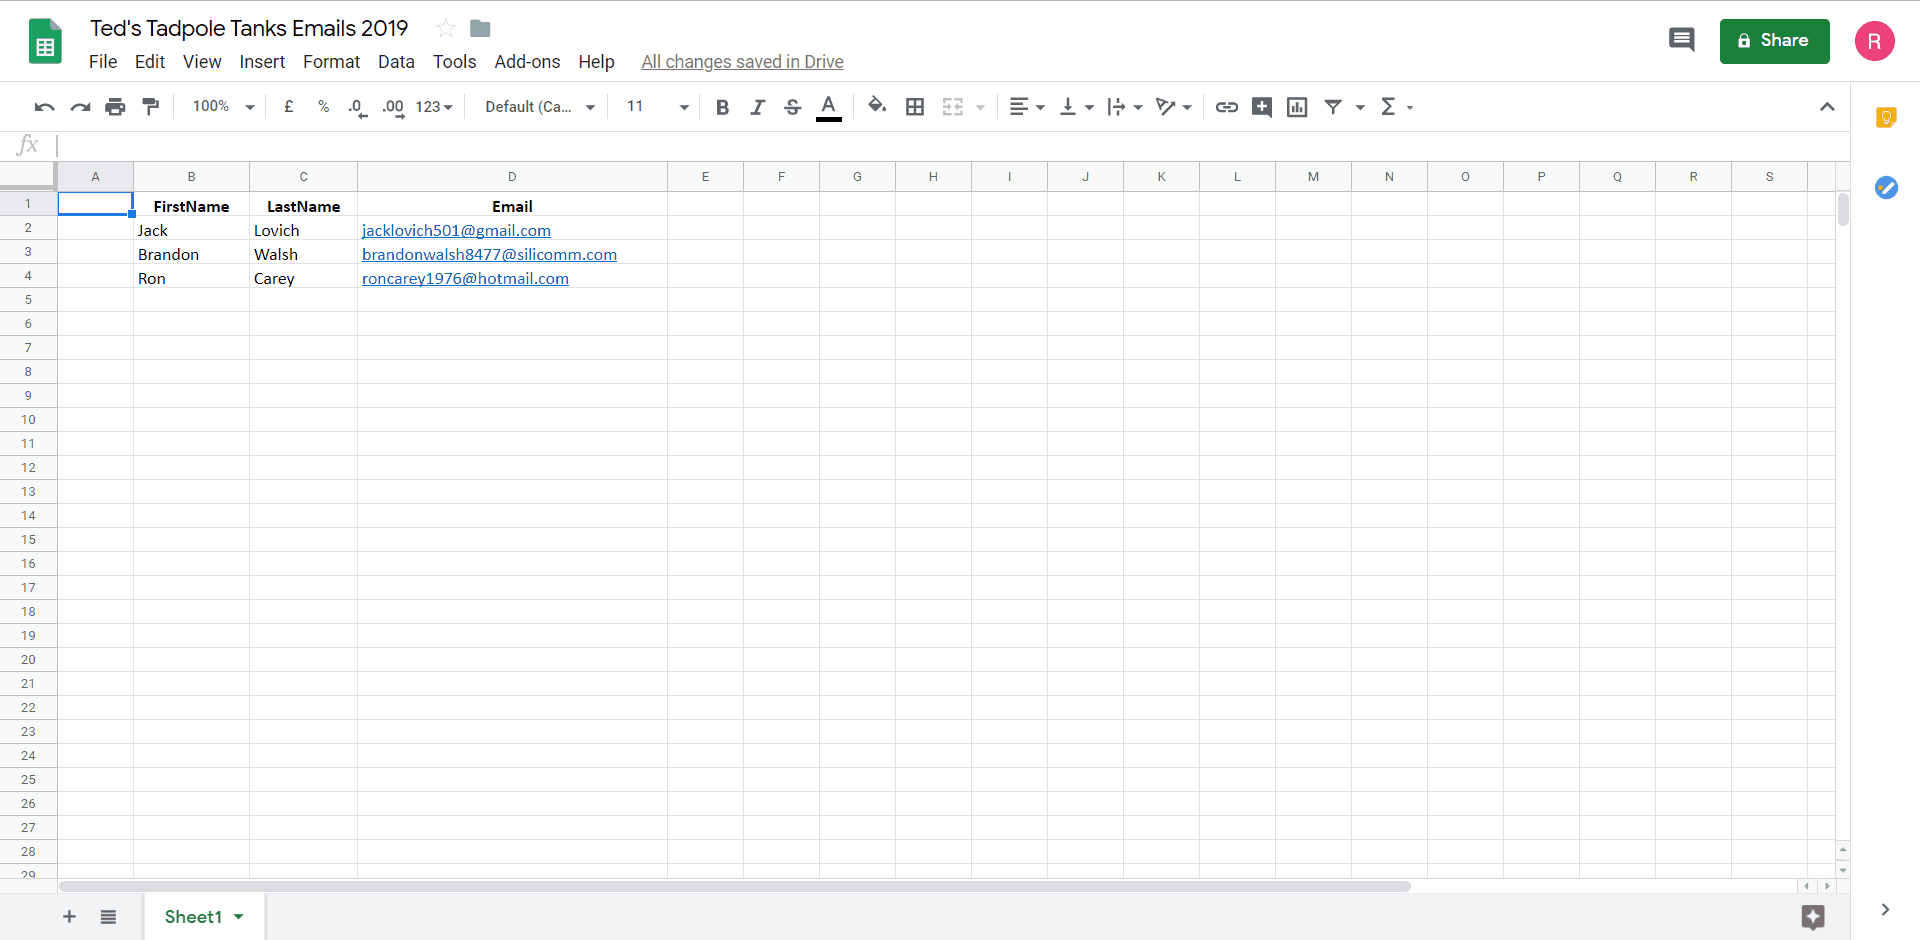 shows the GSheets after deleting rows